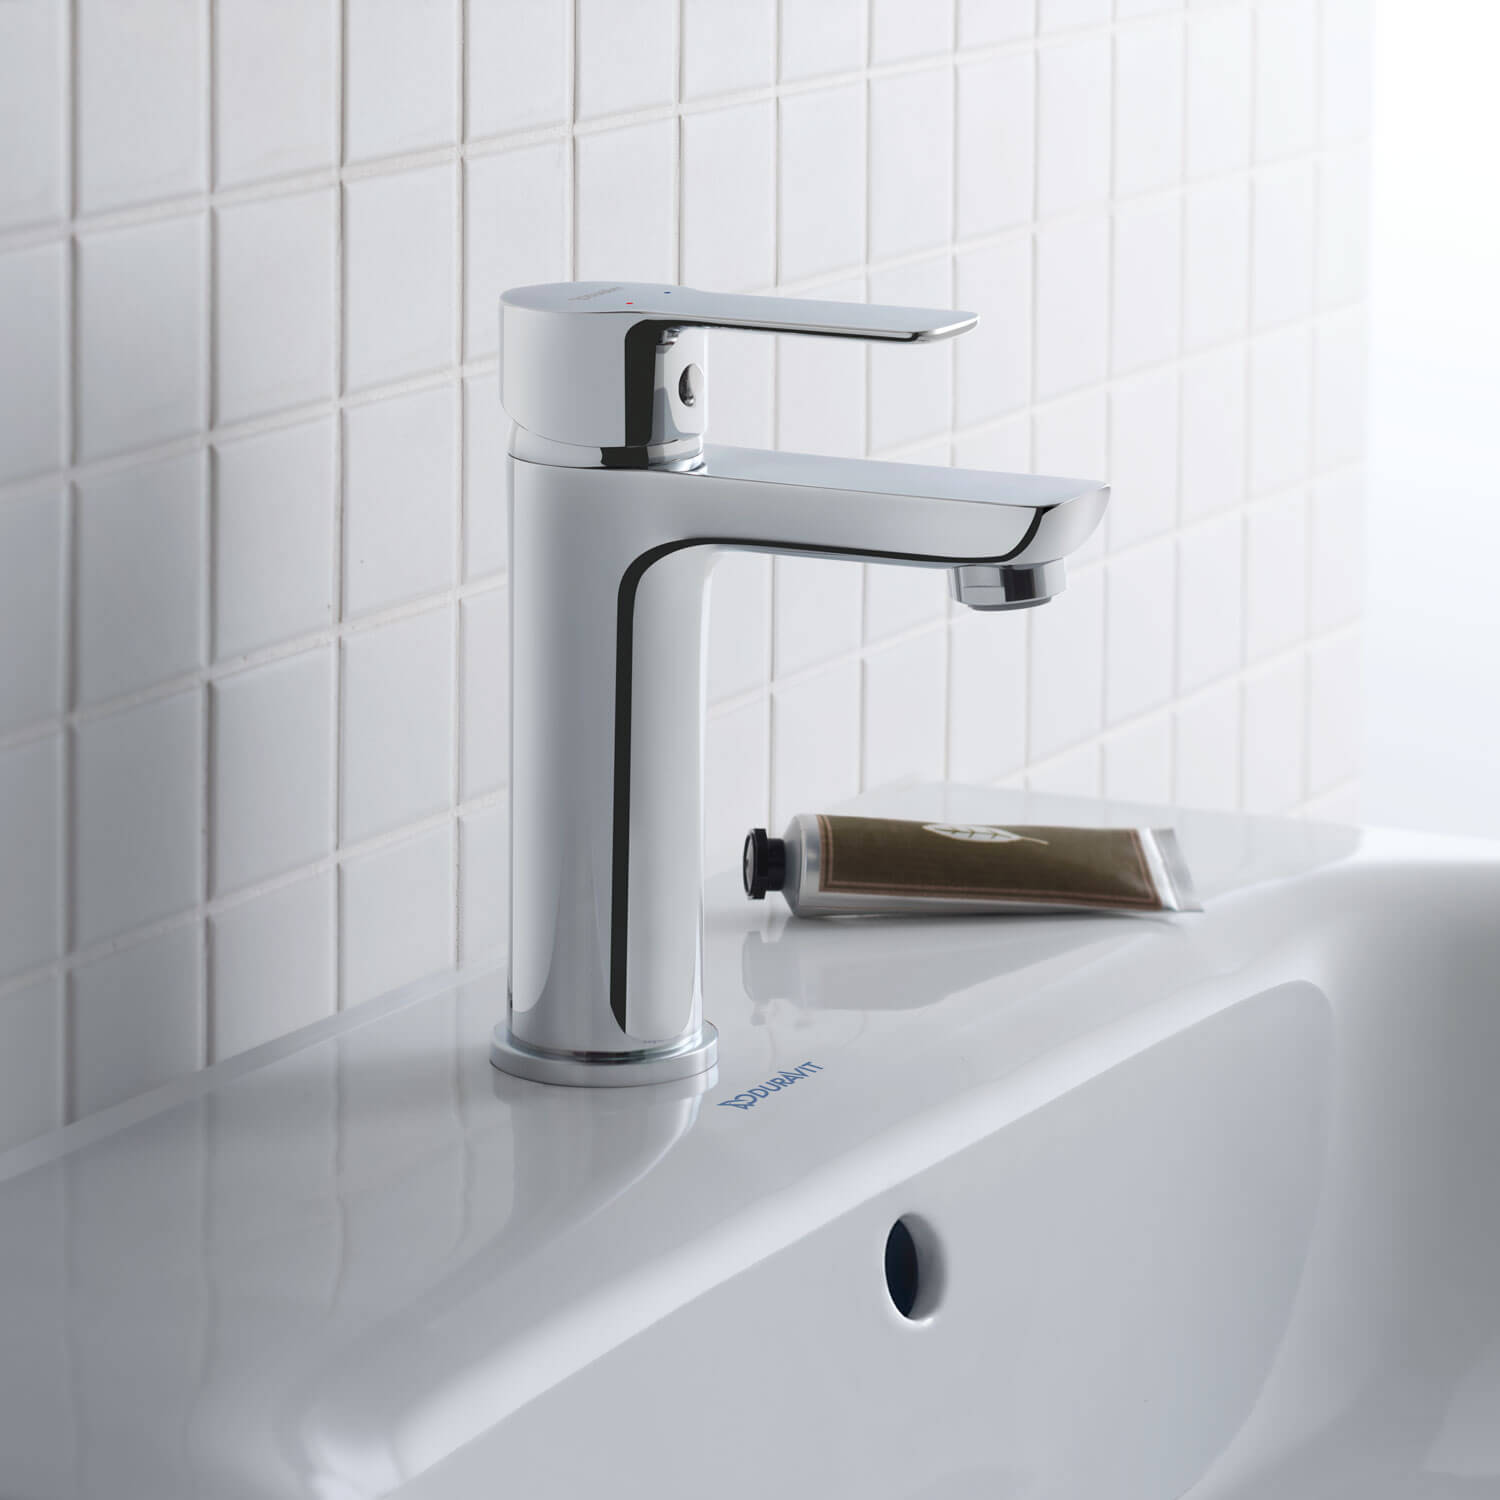 A1 faucet on washbasin
